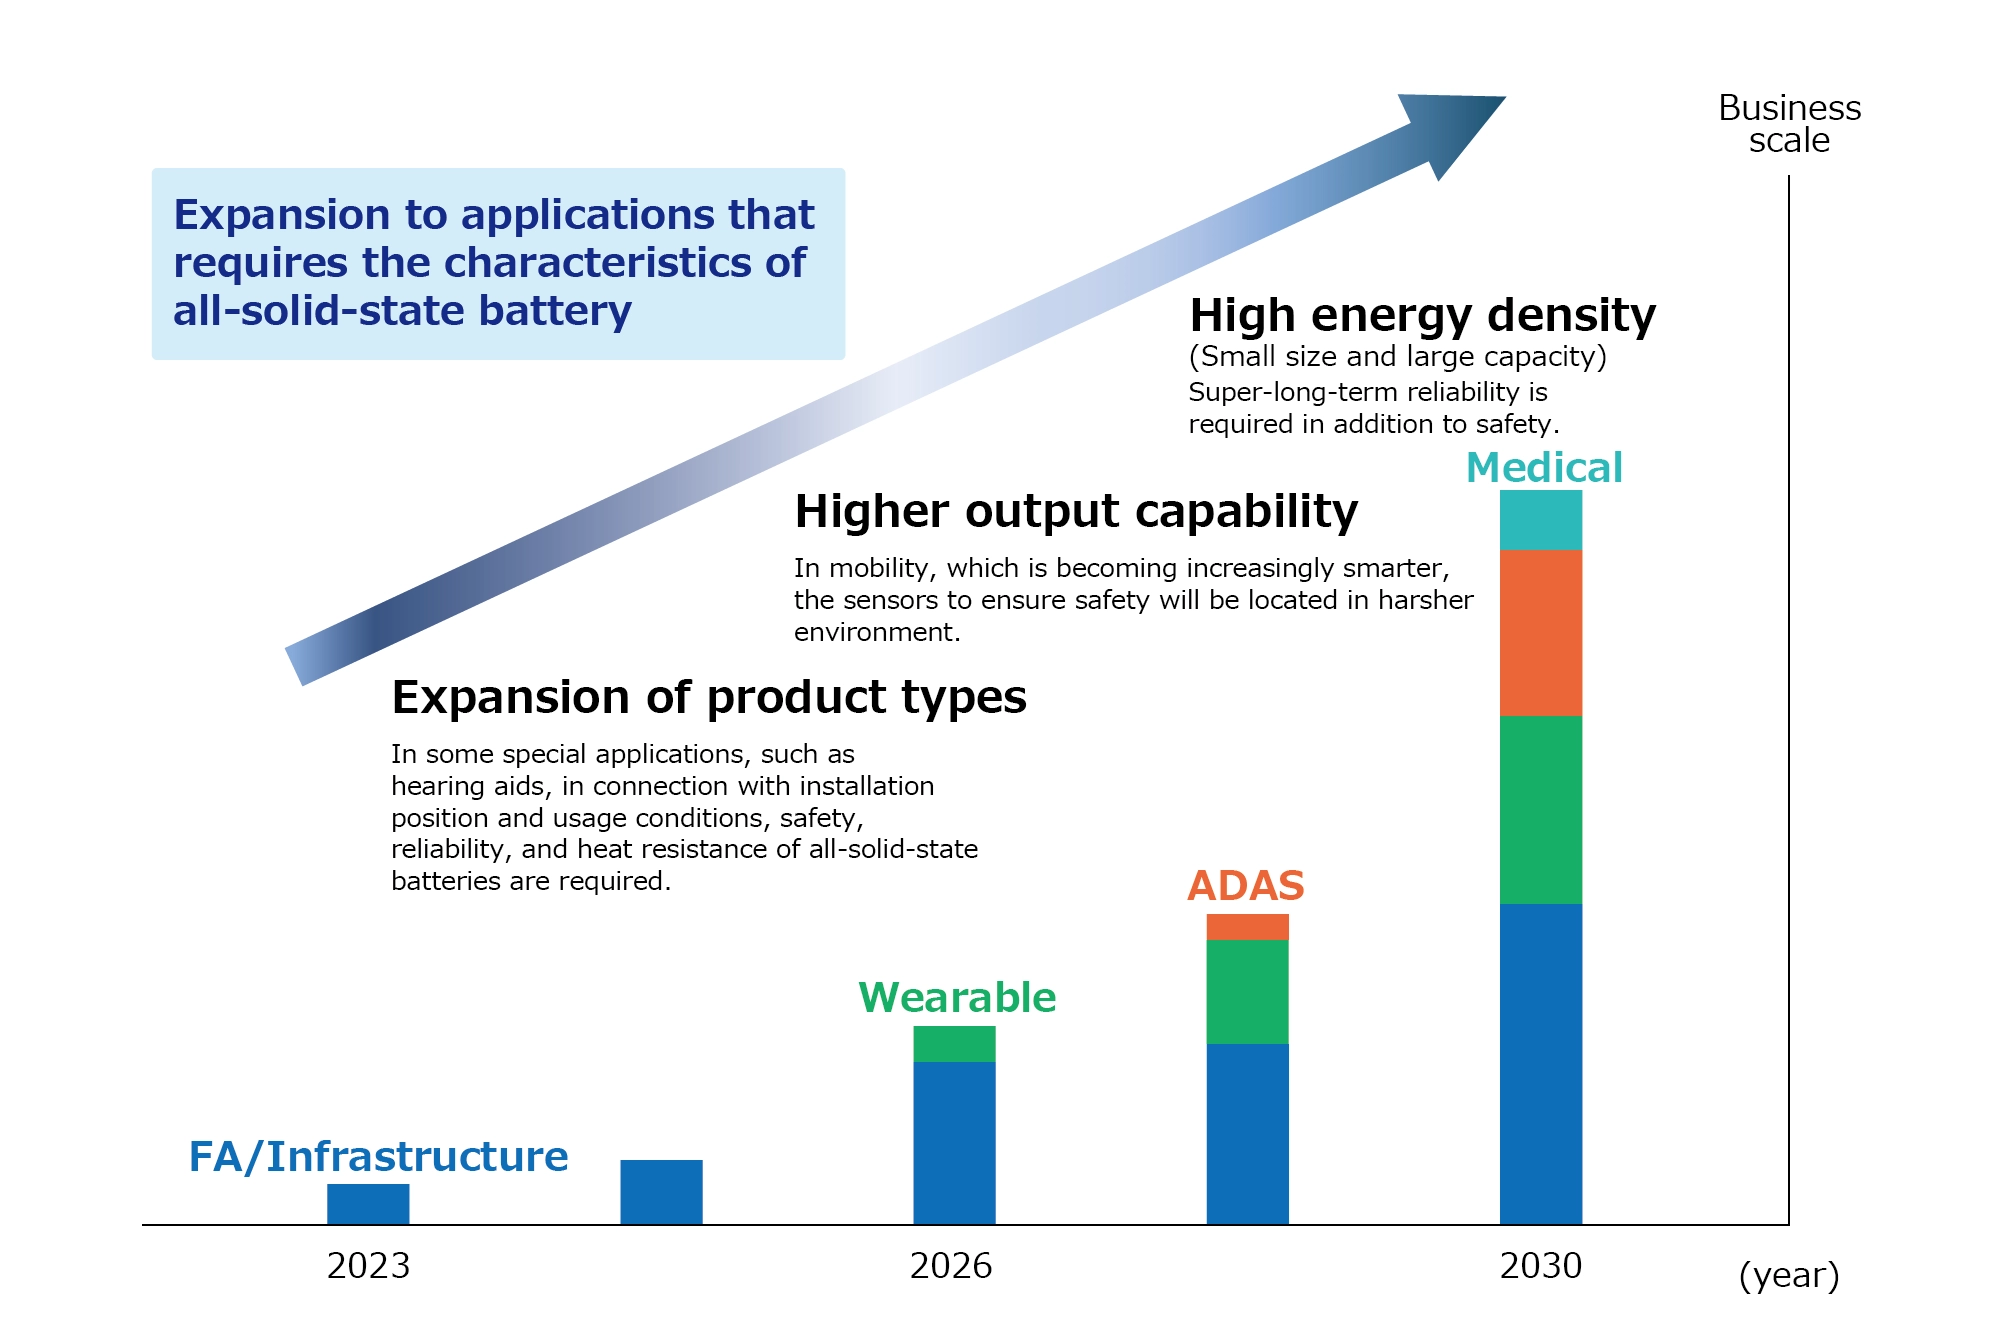 Expansion of applications where all-solid-state batteries must be used